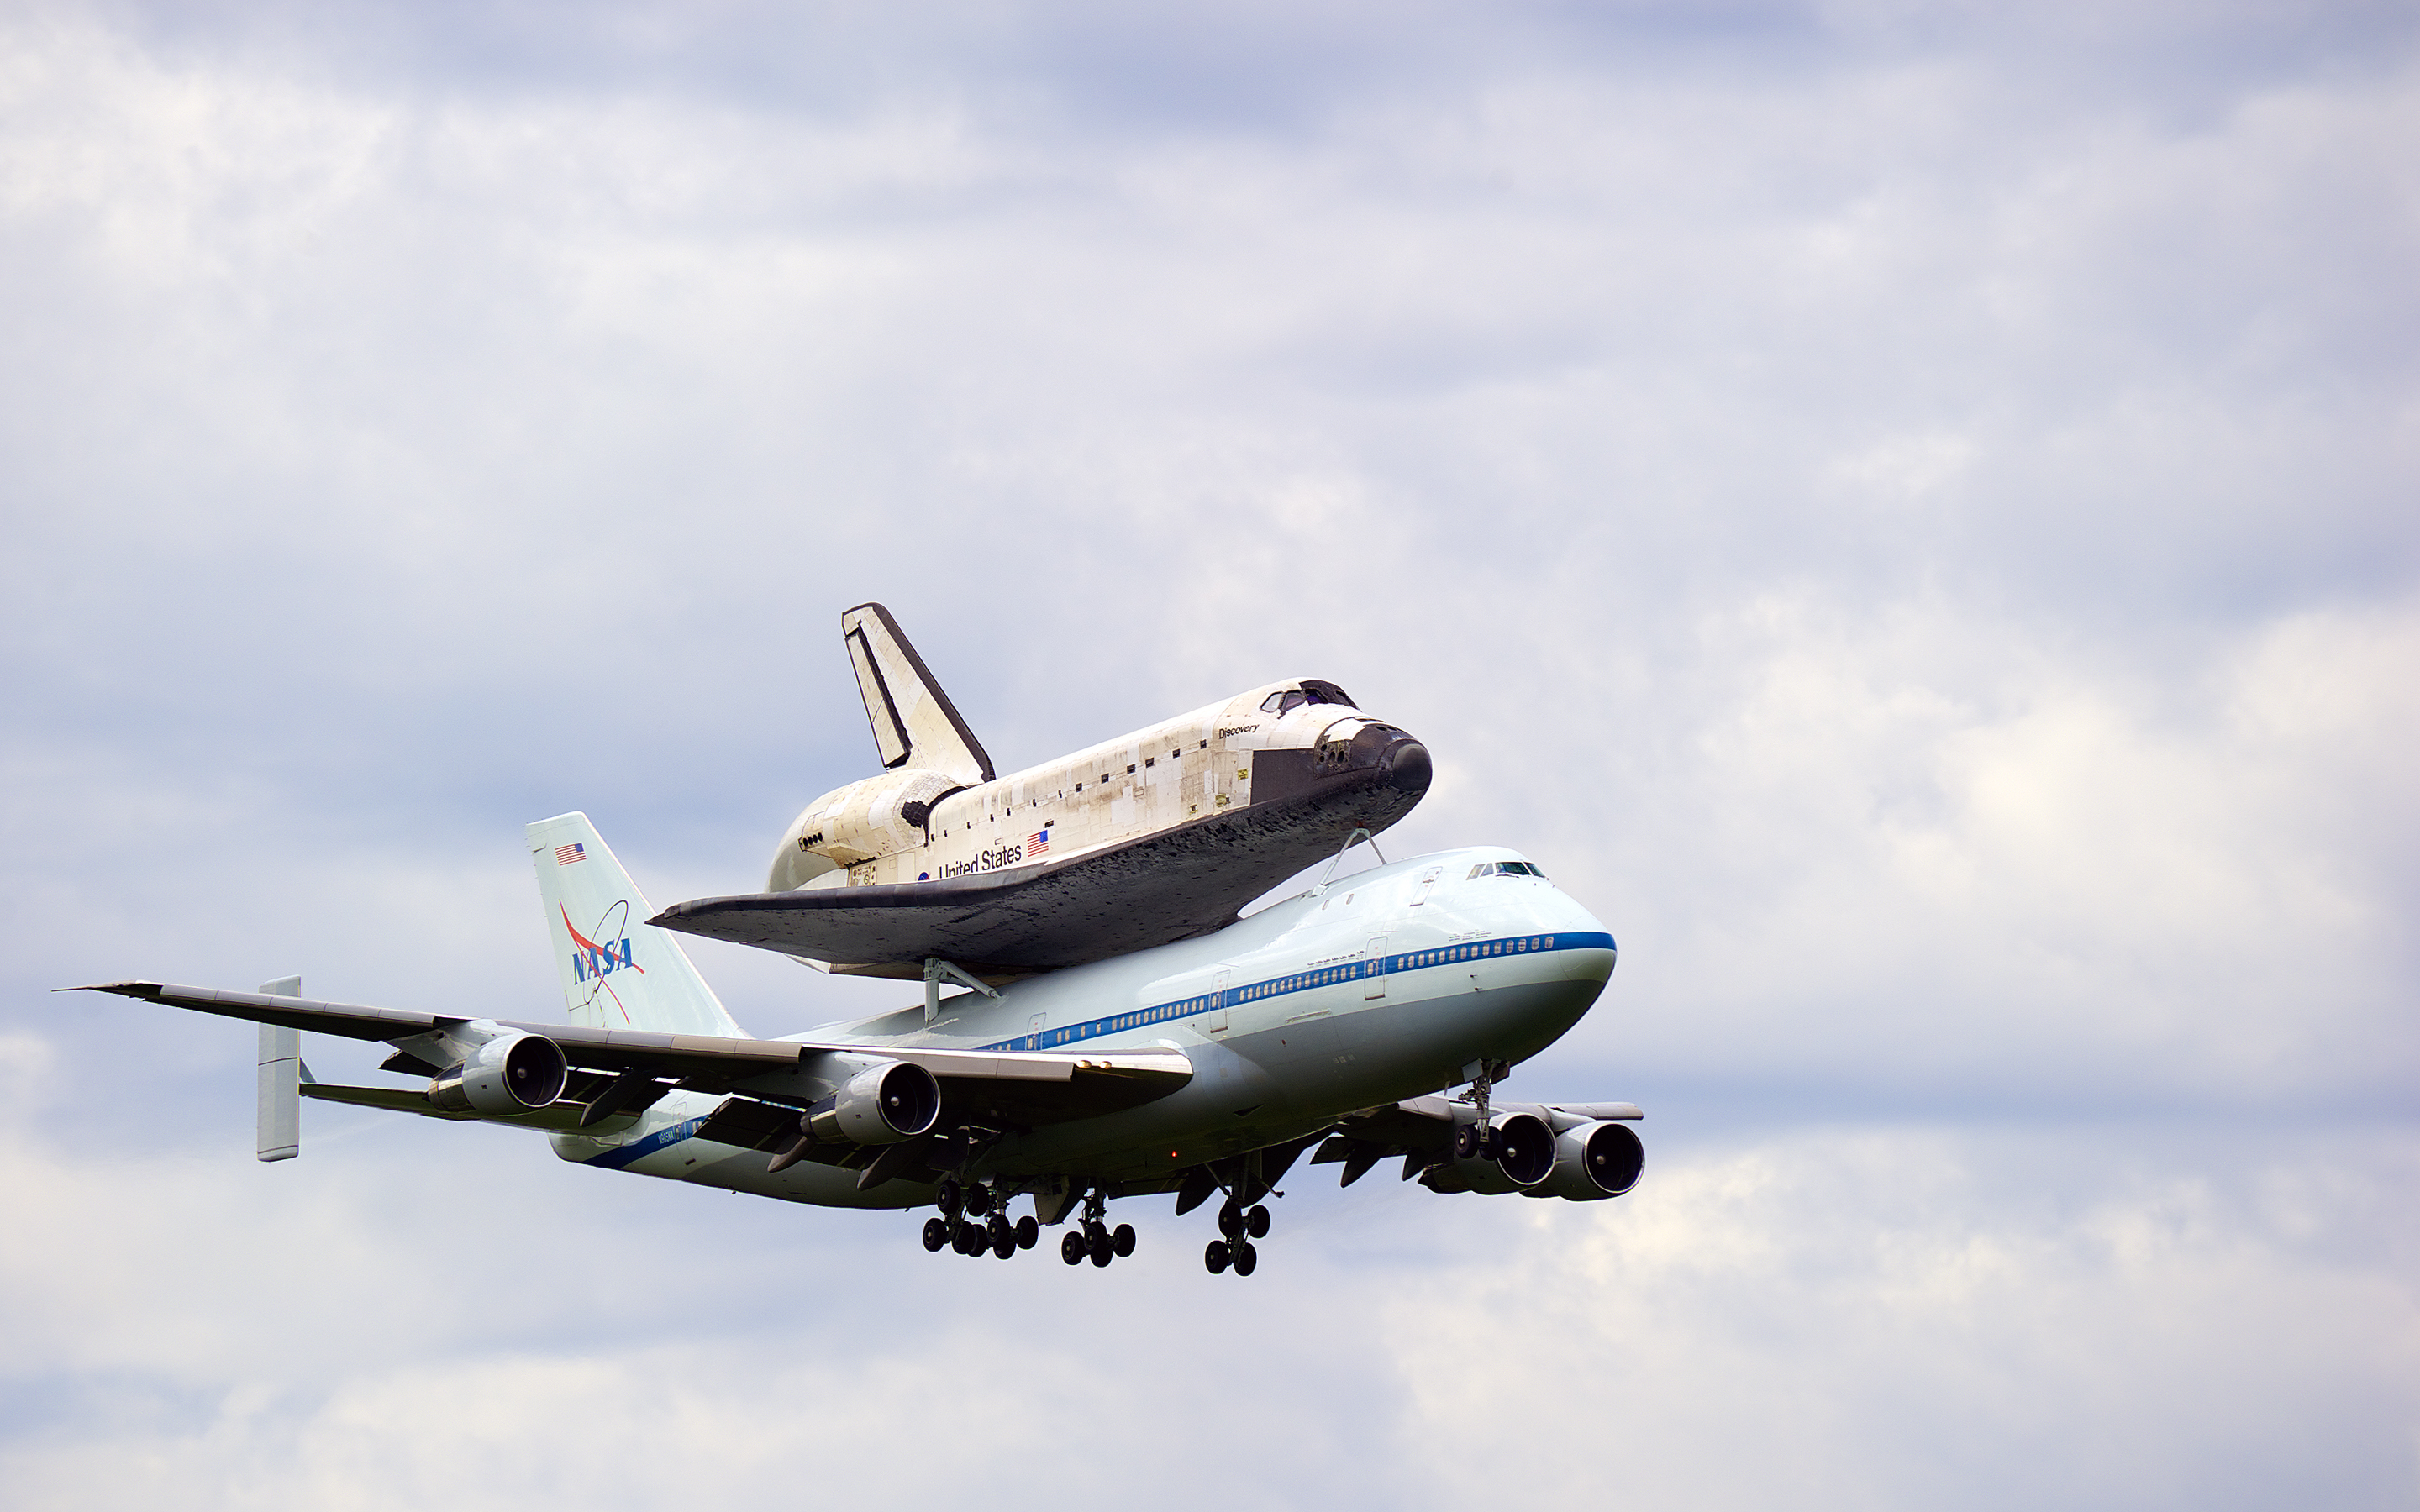 Vehicles Space Shuttle Discovery HD Wallpaper | Background Image